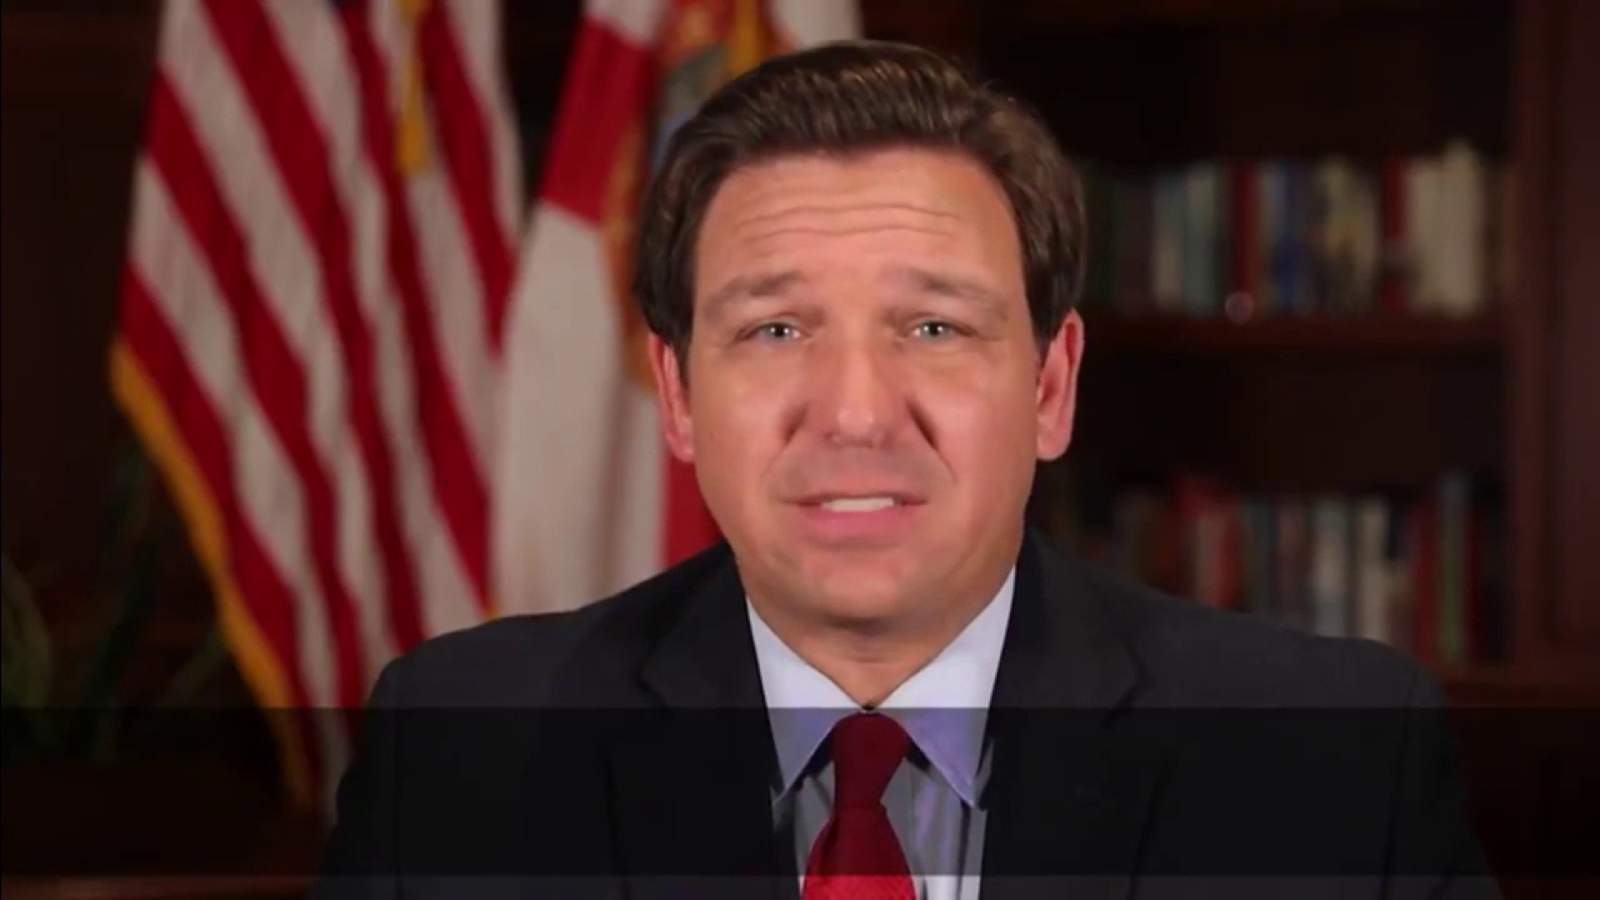 Florida Gov. Ron DeSantis breaks two-week silence to talk about vaccines